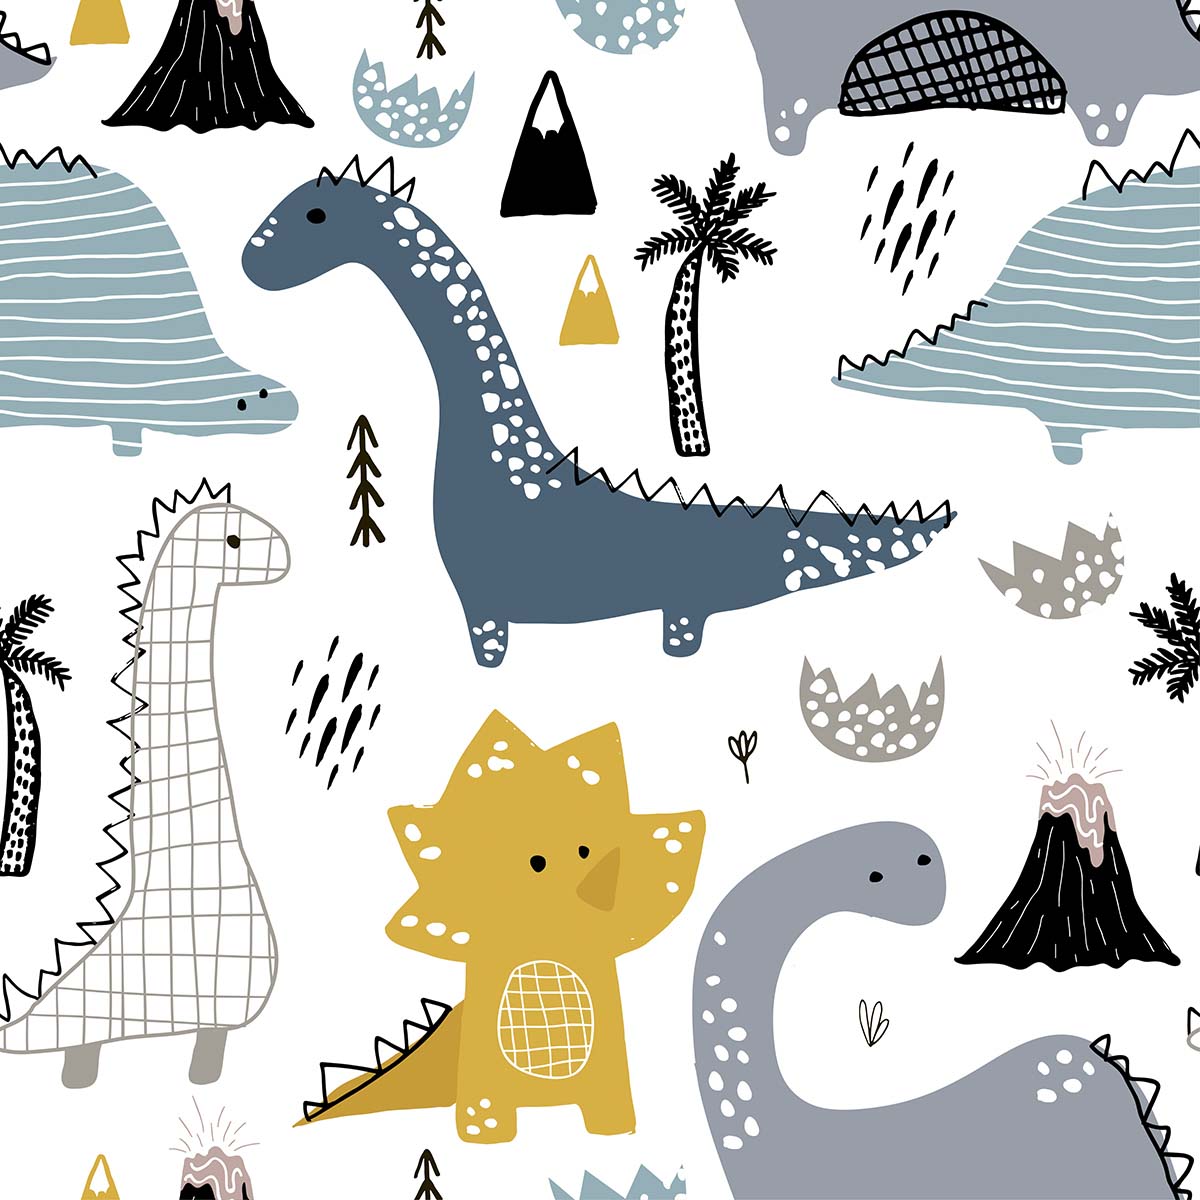 A pattern of dinosaurs and palm trees